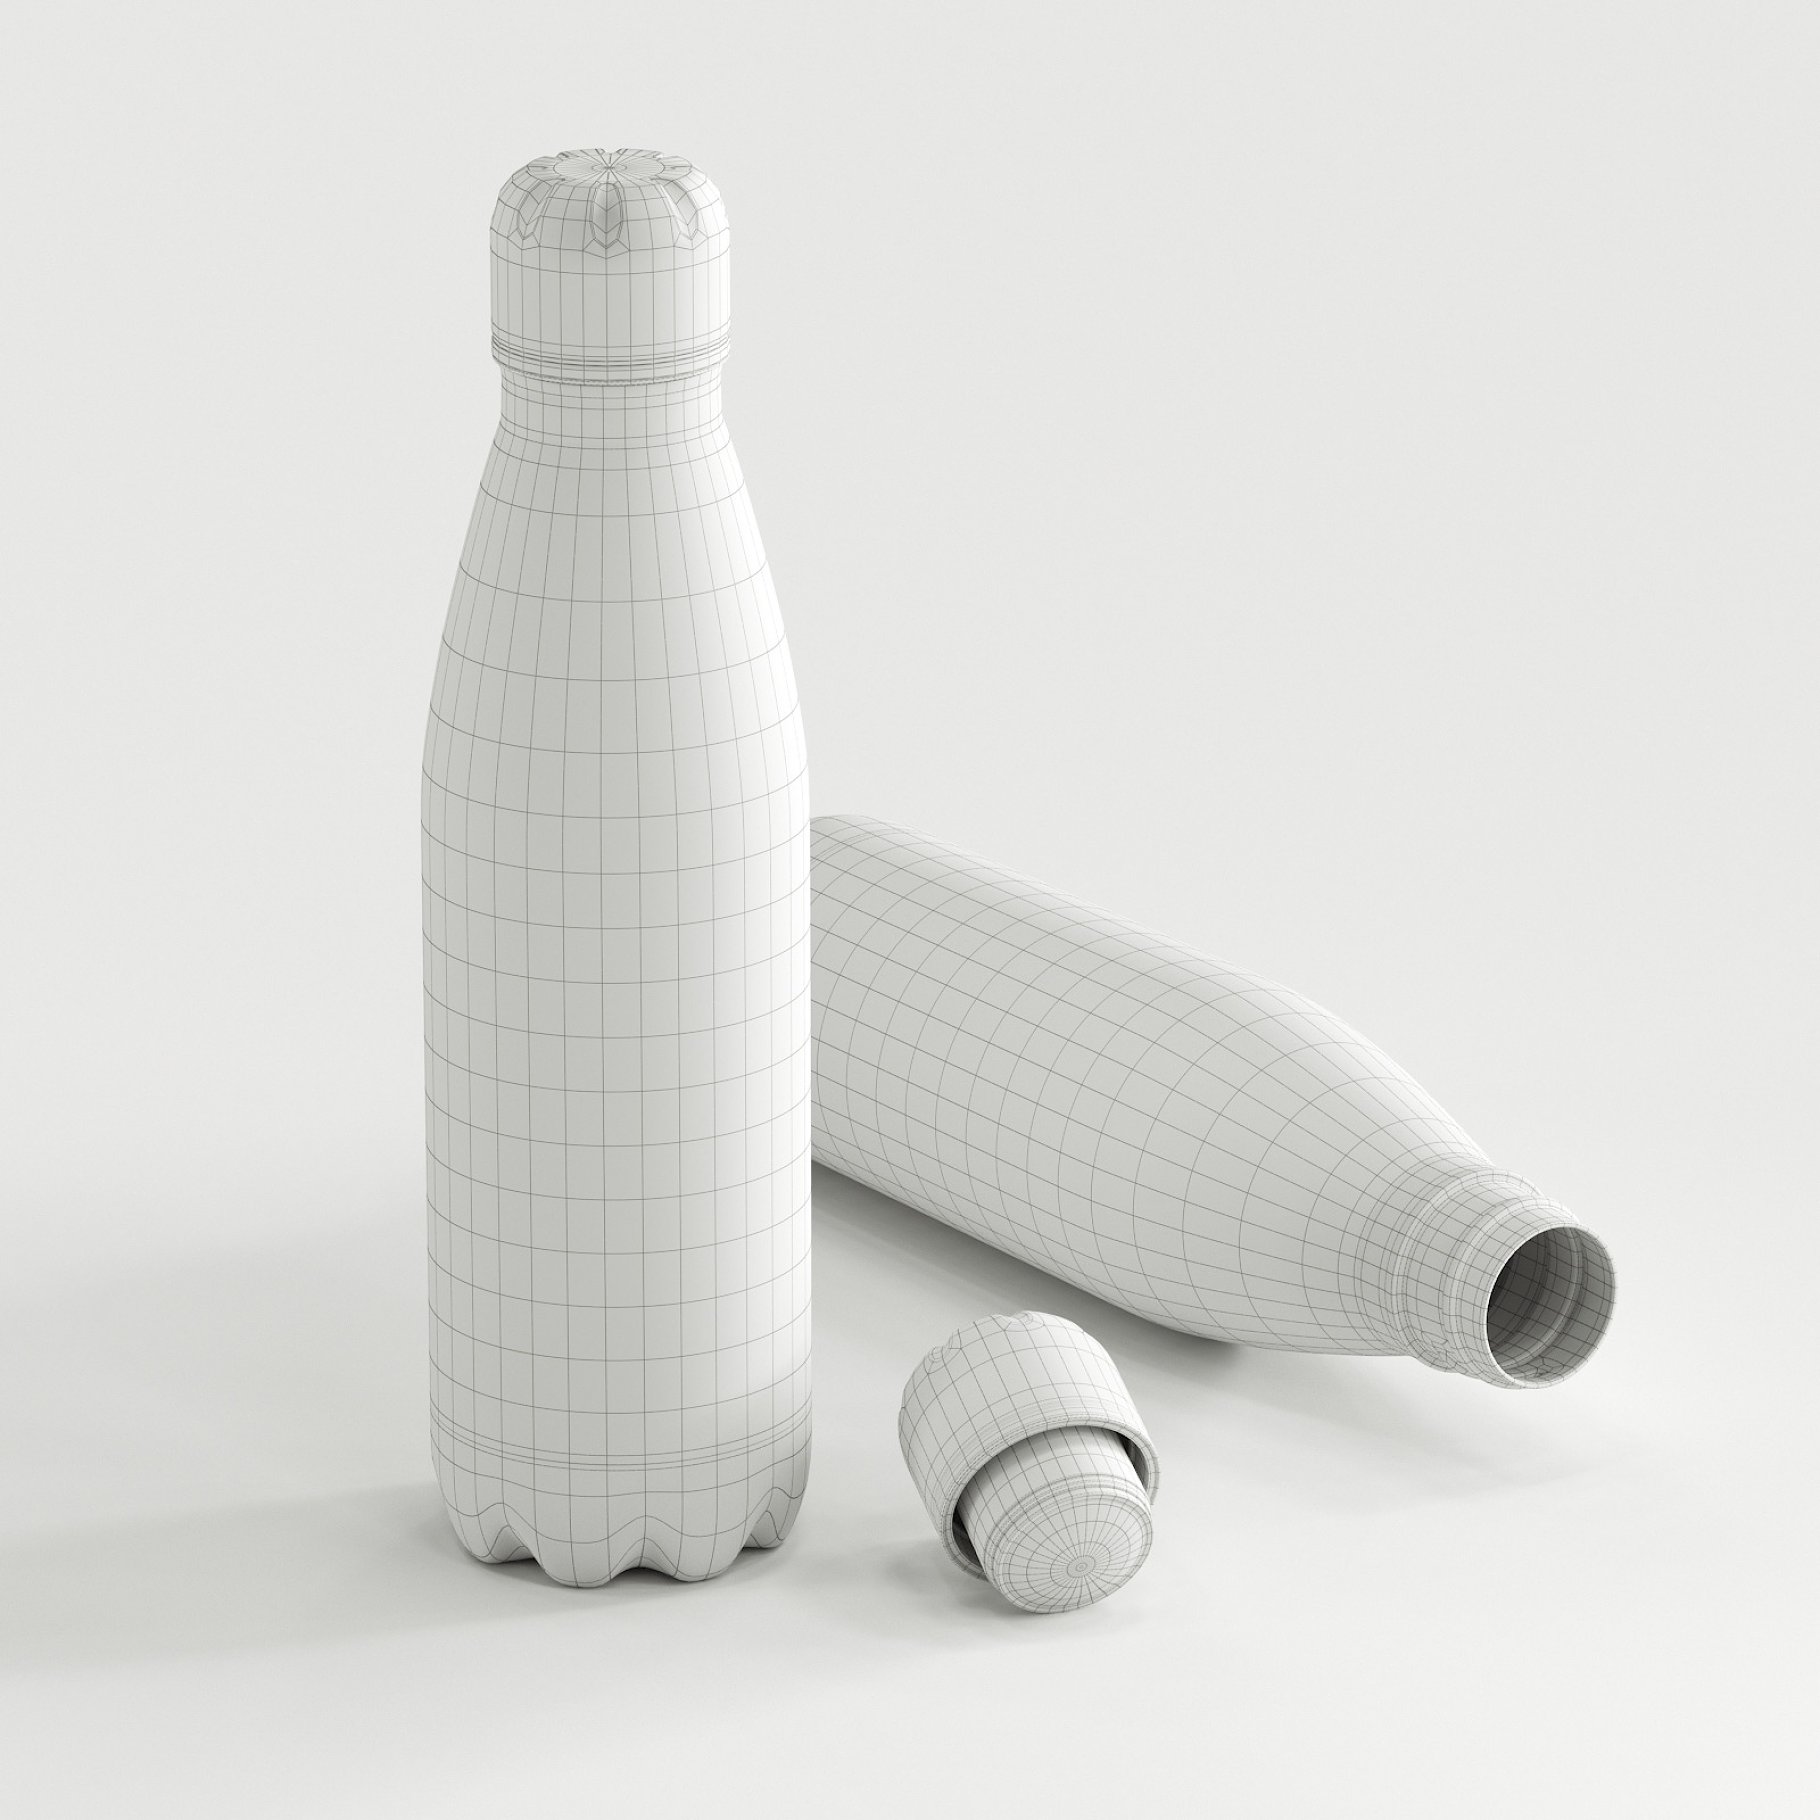 Images of a magnificent 3d model of bottles without texture